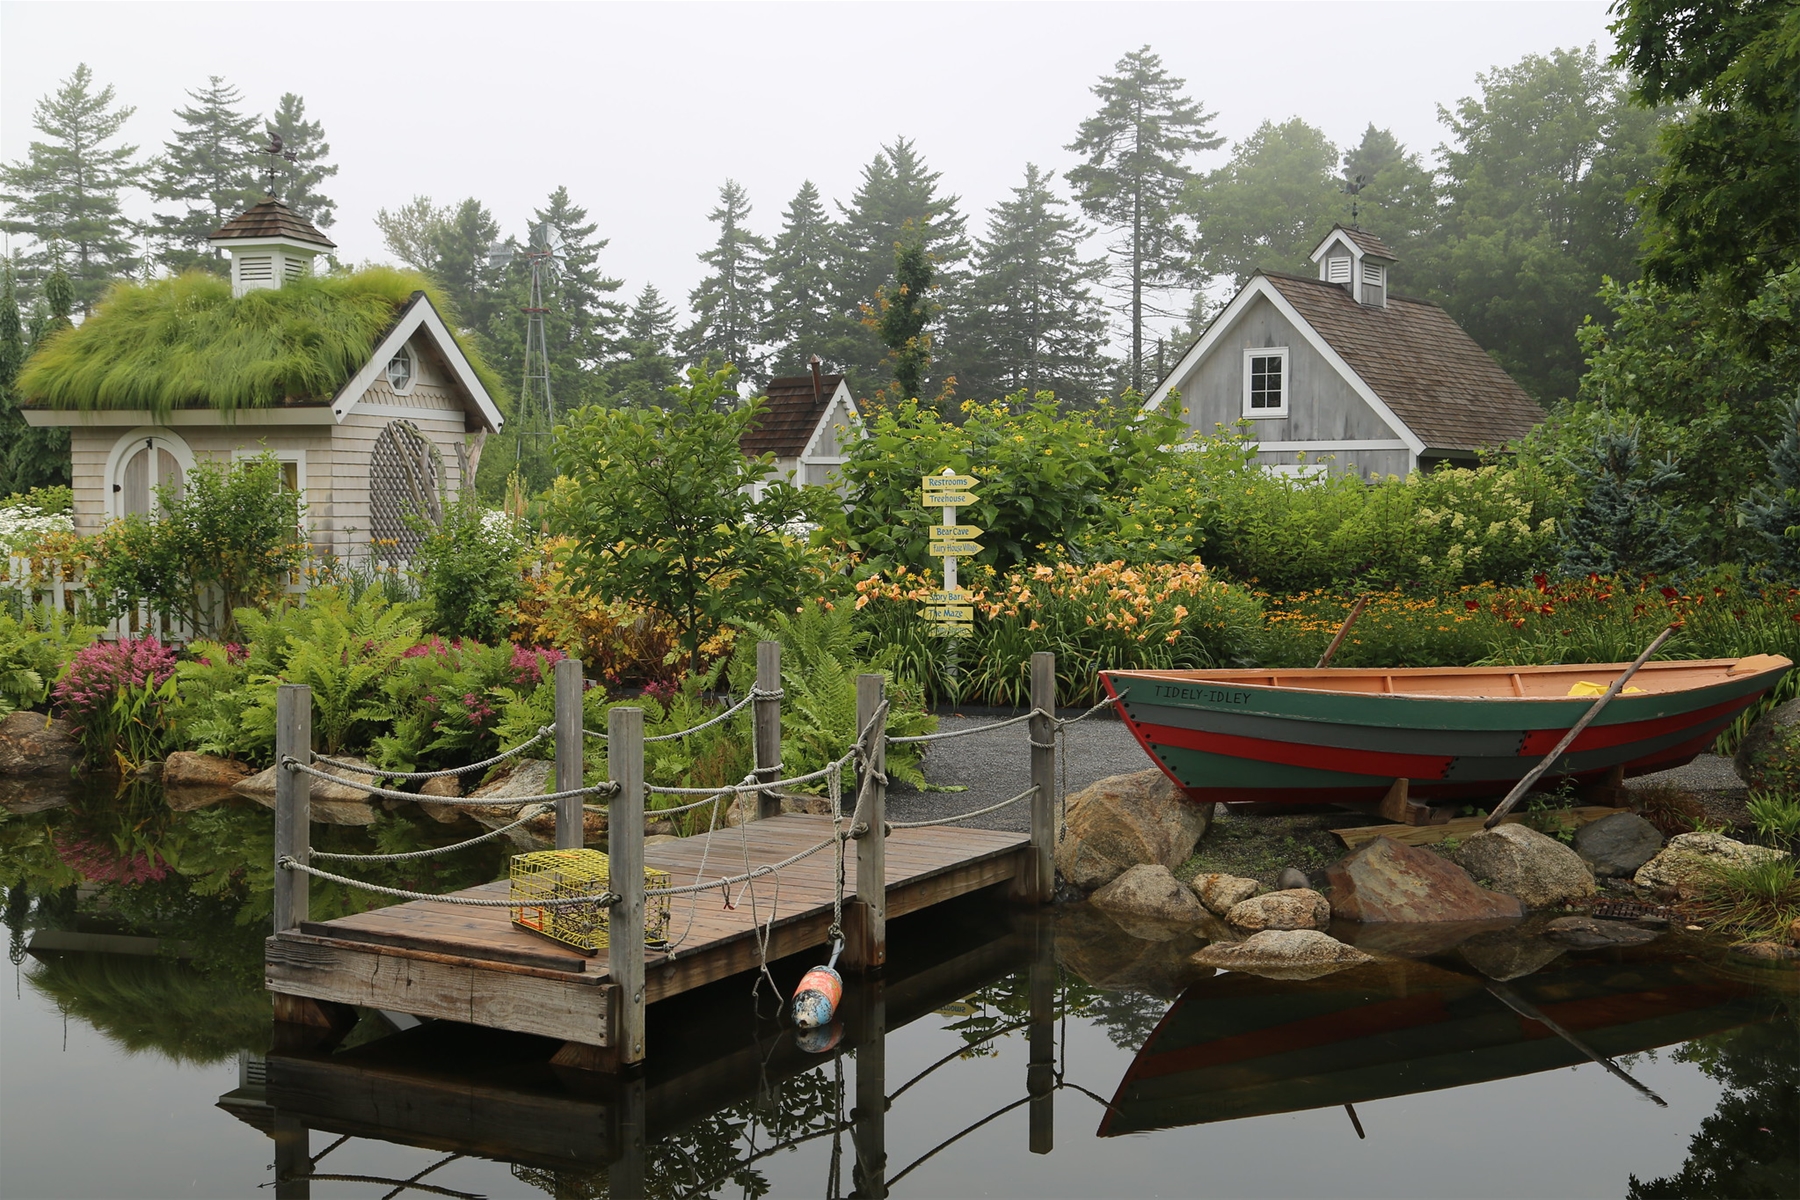 Working Waterfront, Boothbay Harbor (IN MOTION) — Maine Preservation